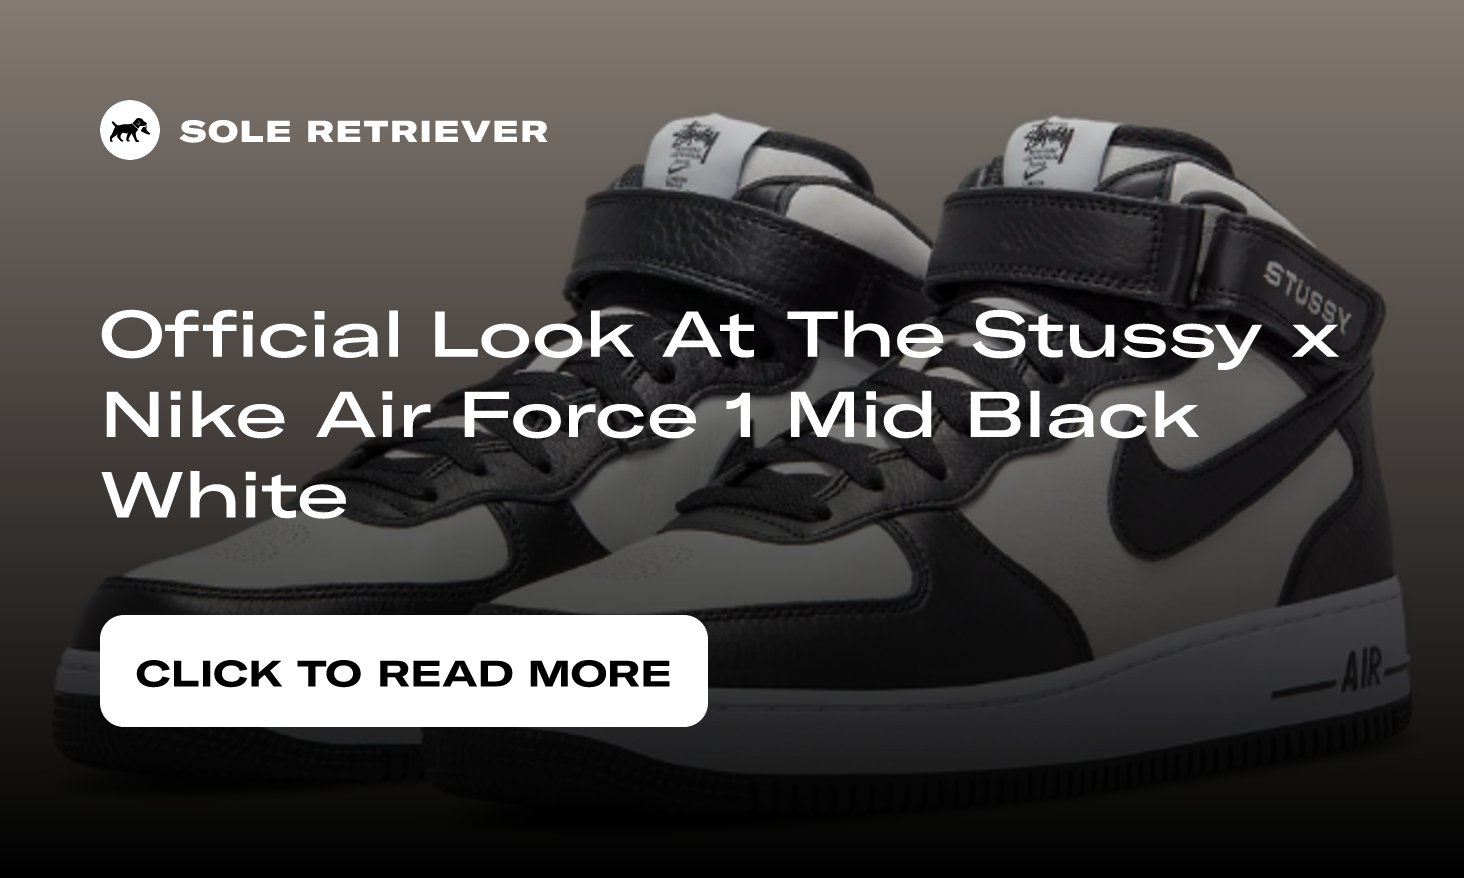 Stussy X Nike Air Force 1 Is Dropping Soon: Release Info